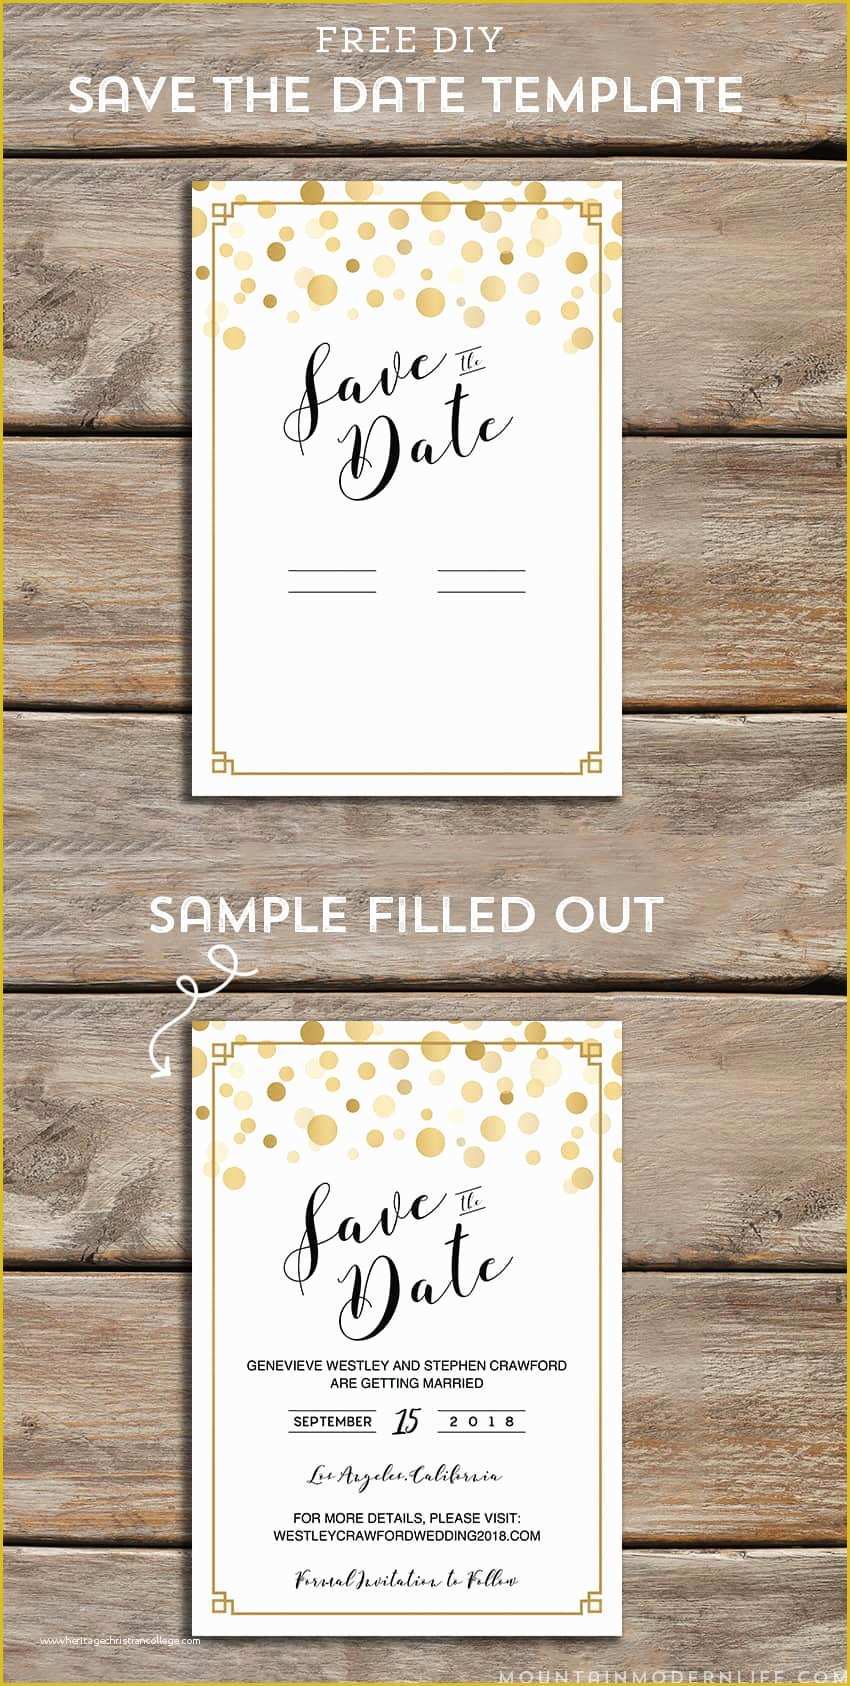 Save the Date Ae Template Free Download Of Modern Diy Save the Date Free Printable